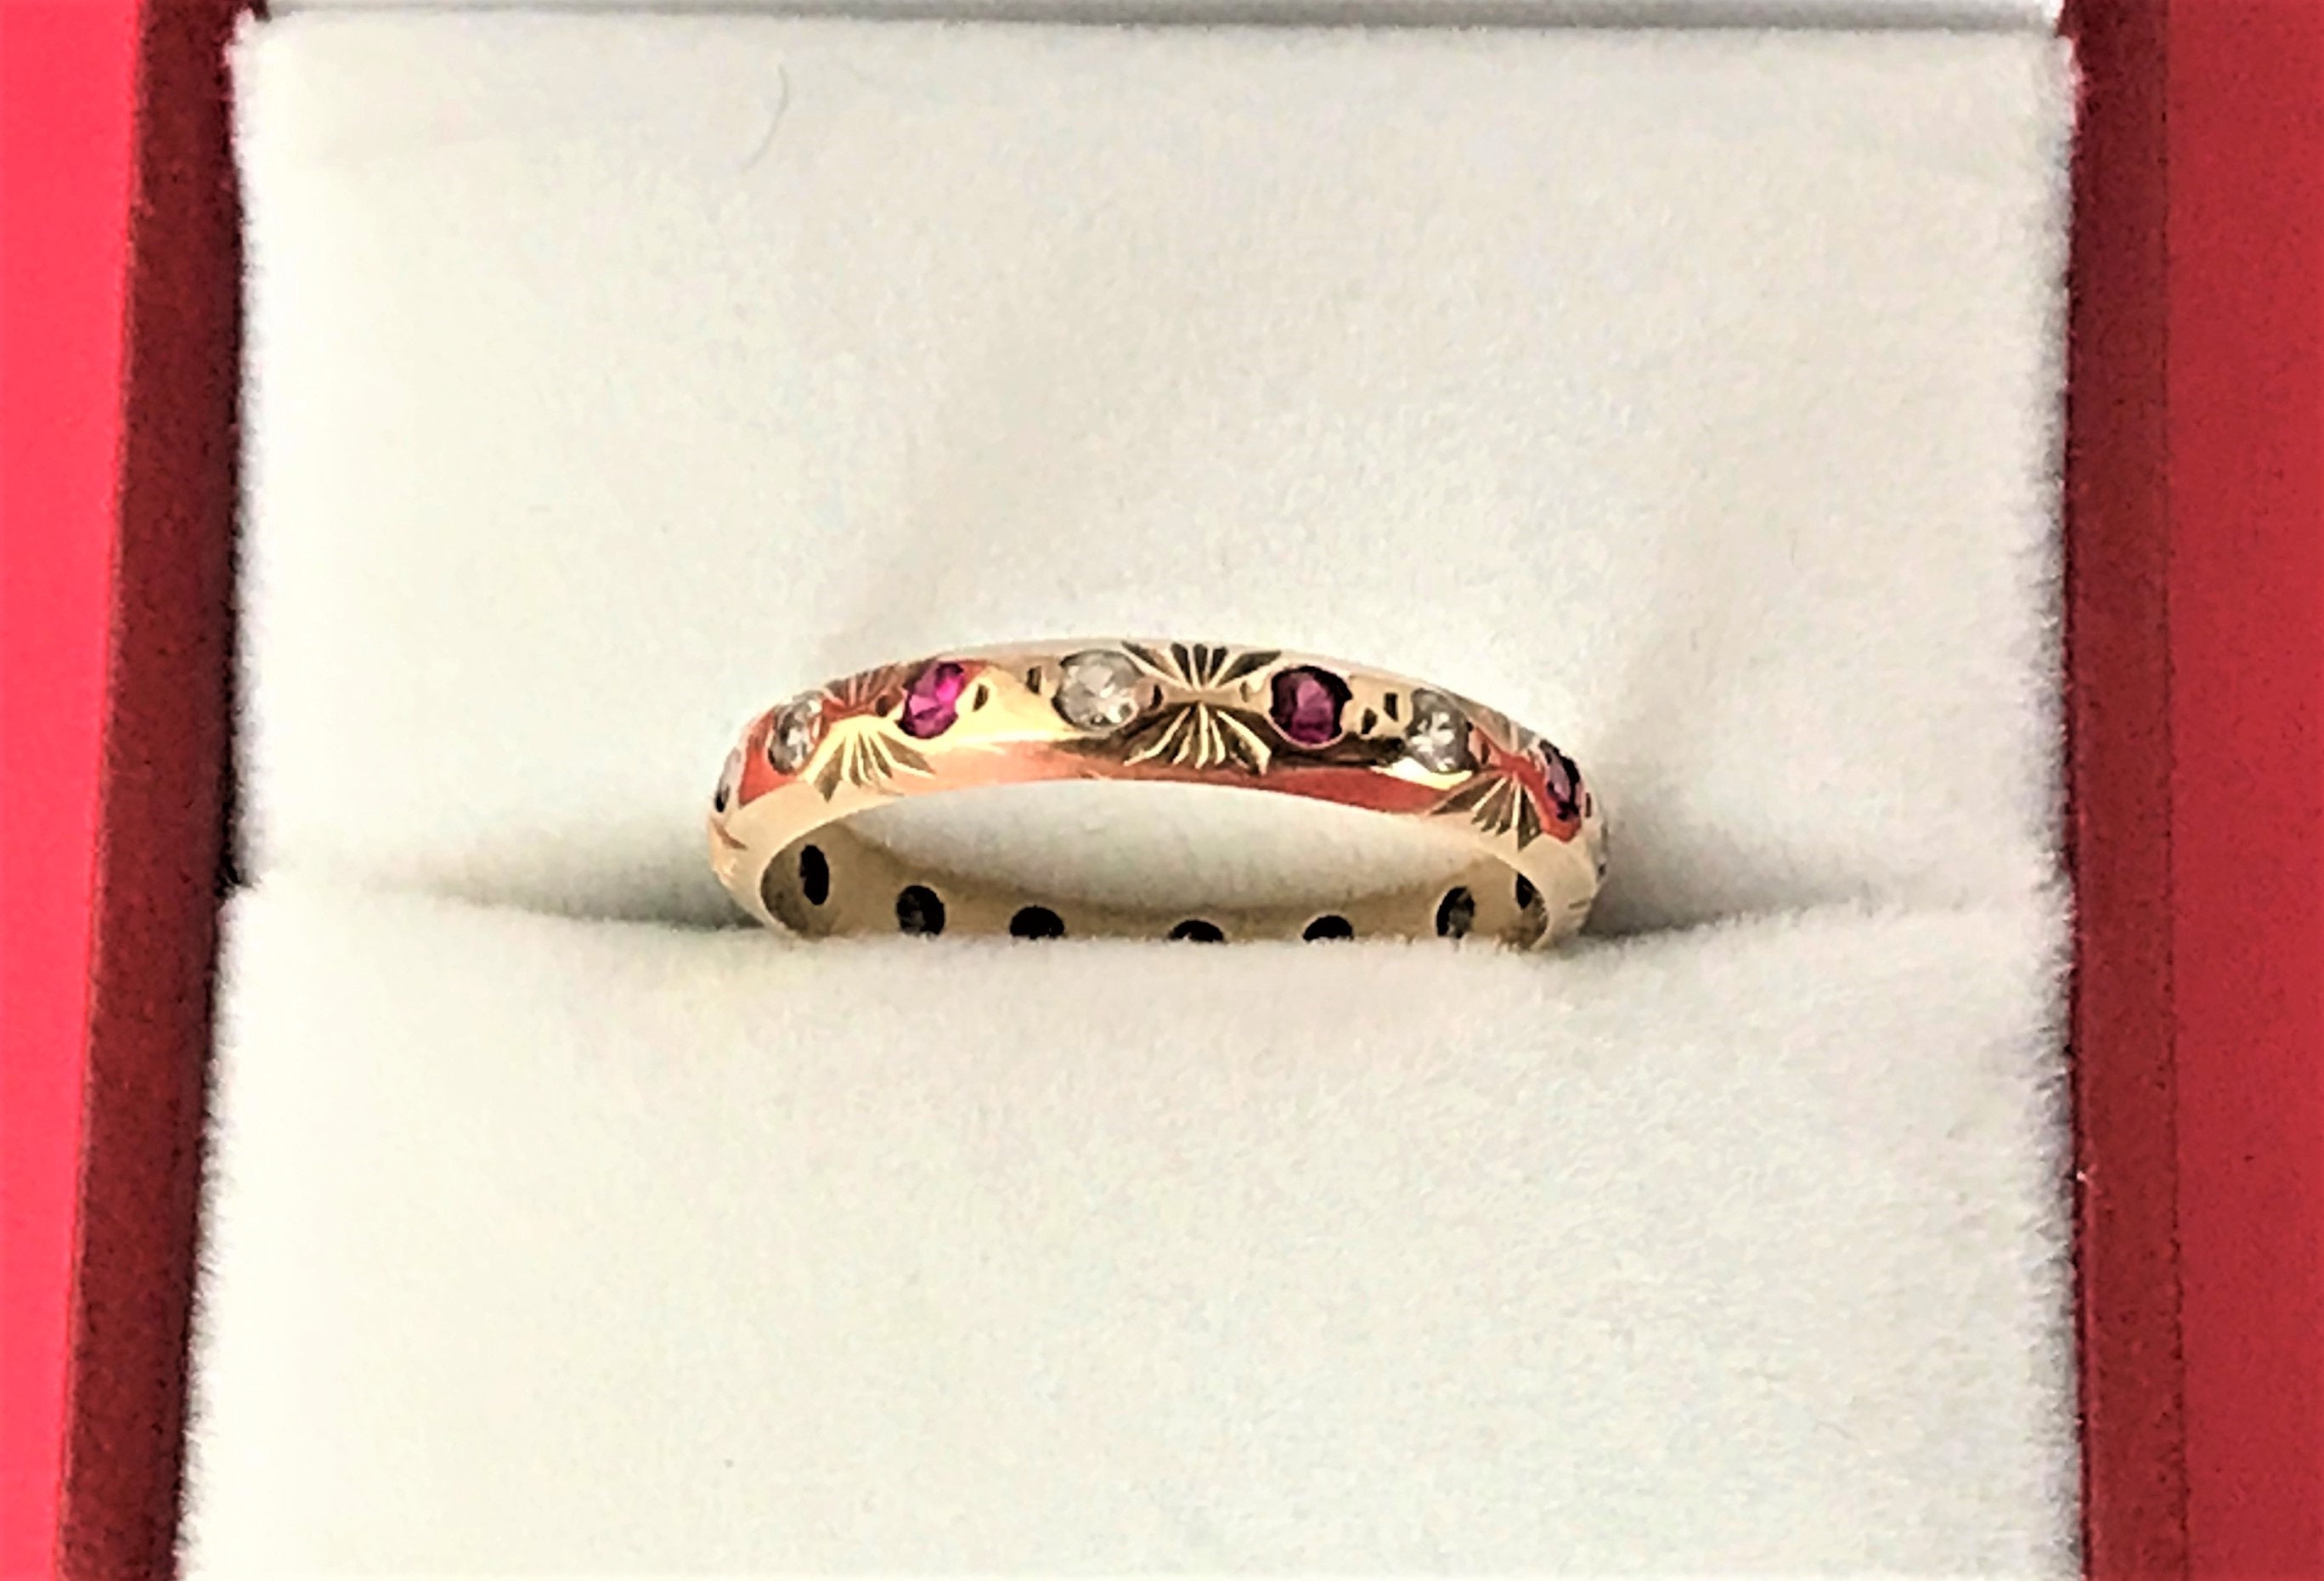 Ring Size  M 1/2 Solid Yellow Gold Full Eternity Band Ring set with 8 Rubies and 8 Colourless Spinel Stones Ladies 9 ct Hallmarked